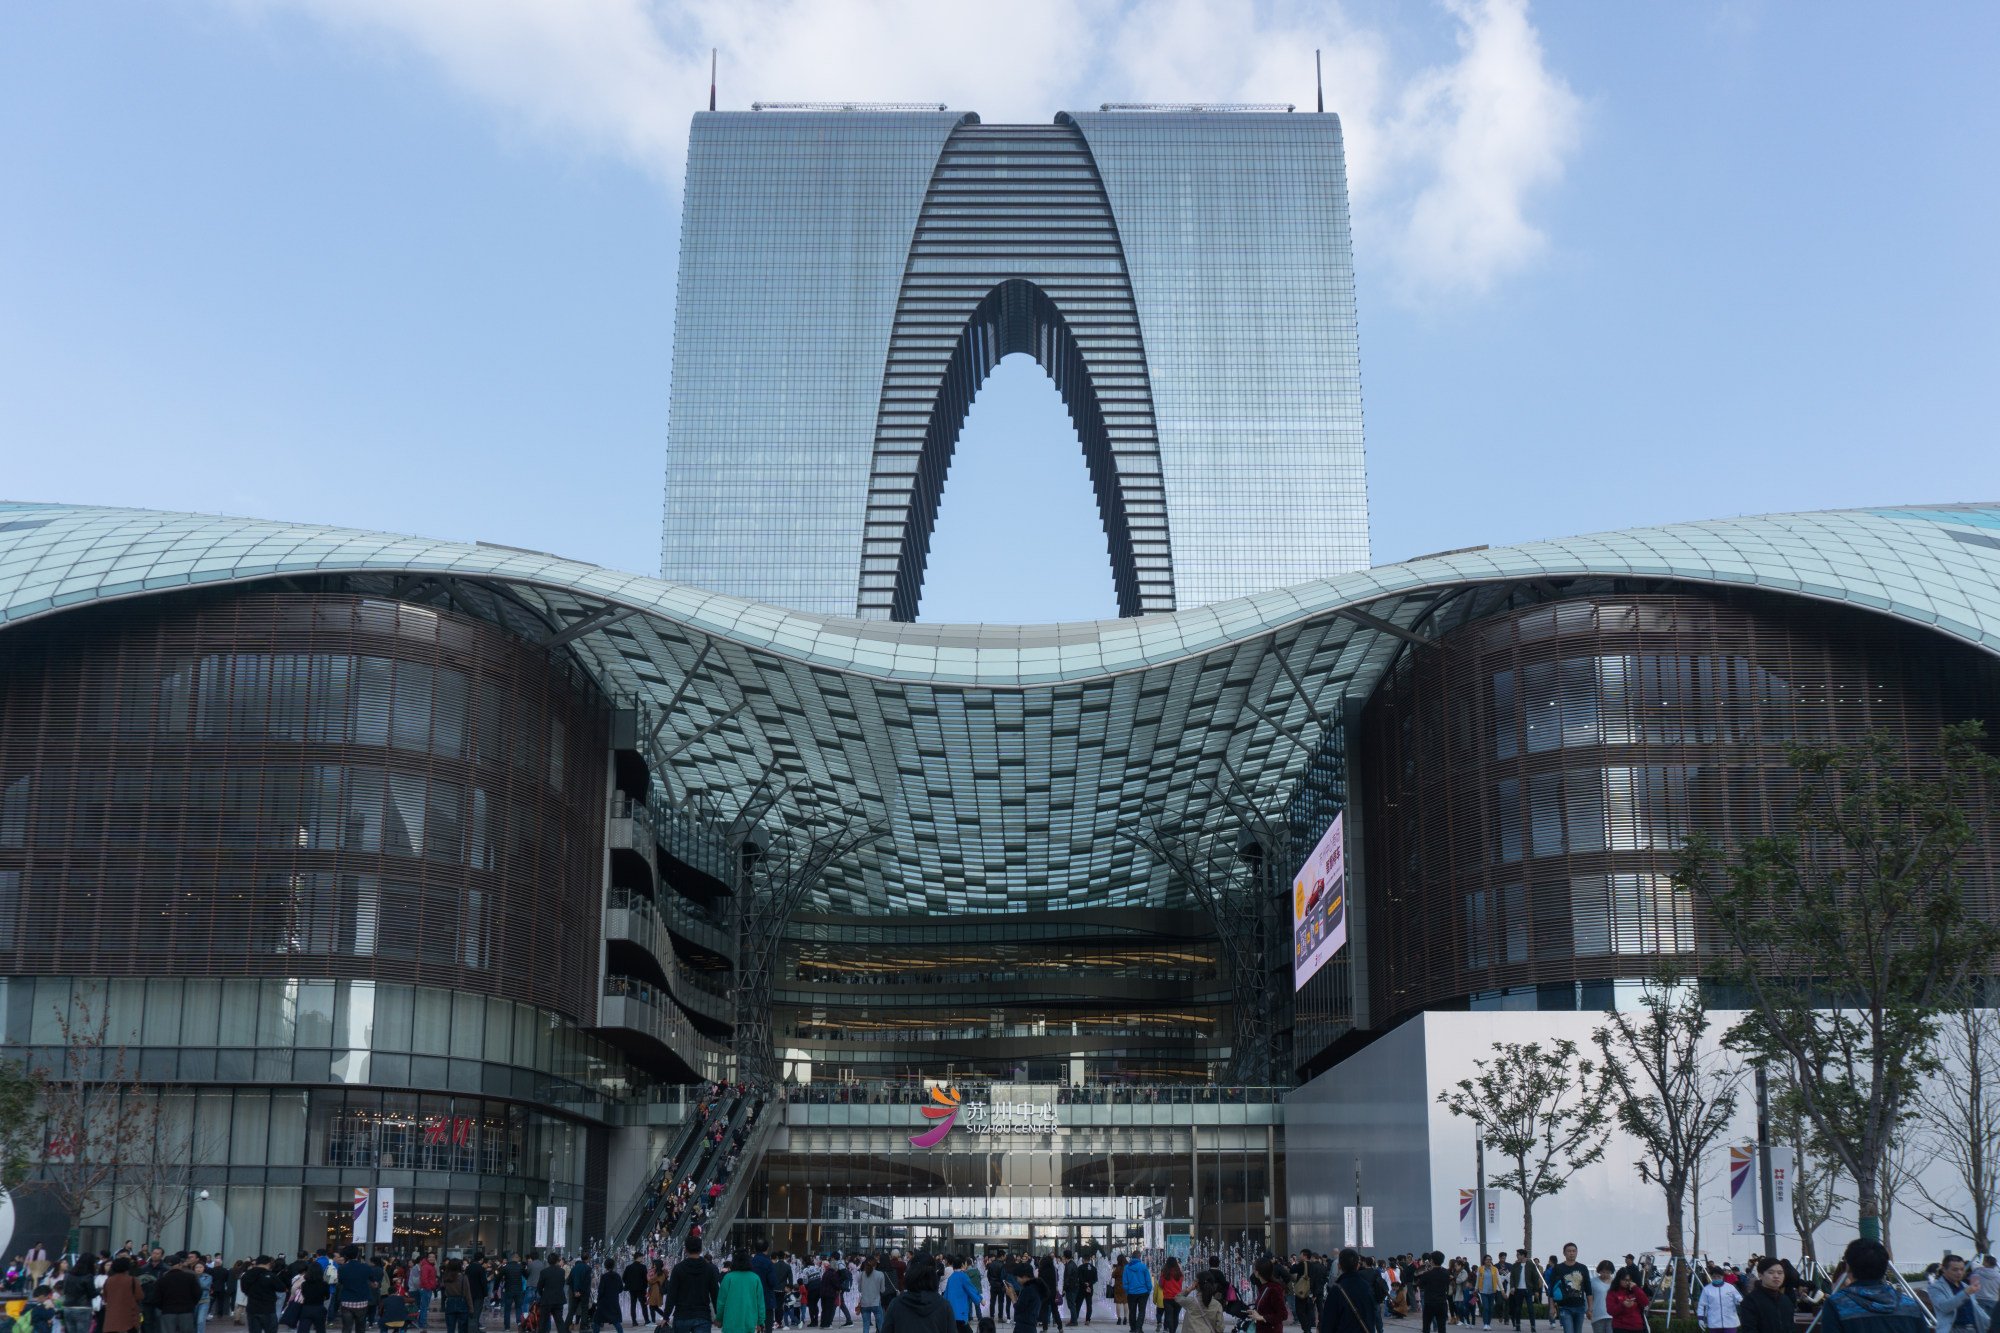 Suzhou Centre Mall, which opened in November 2017, was developed by Singaporean real estate firm CapitaLand. It is the largest shopping centre in Suzhou, the most populous city in eastern Jiangsu province. Photo: Shutterstock